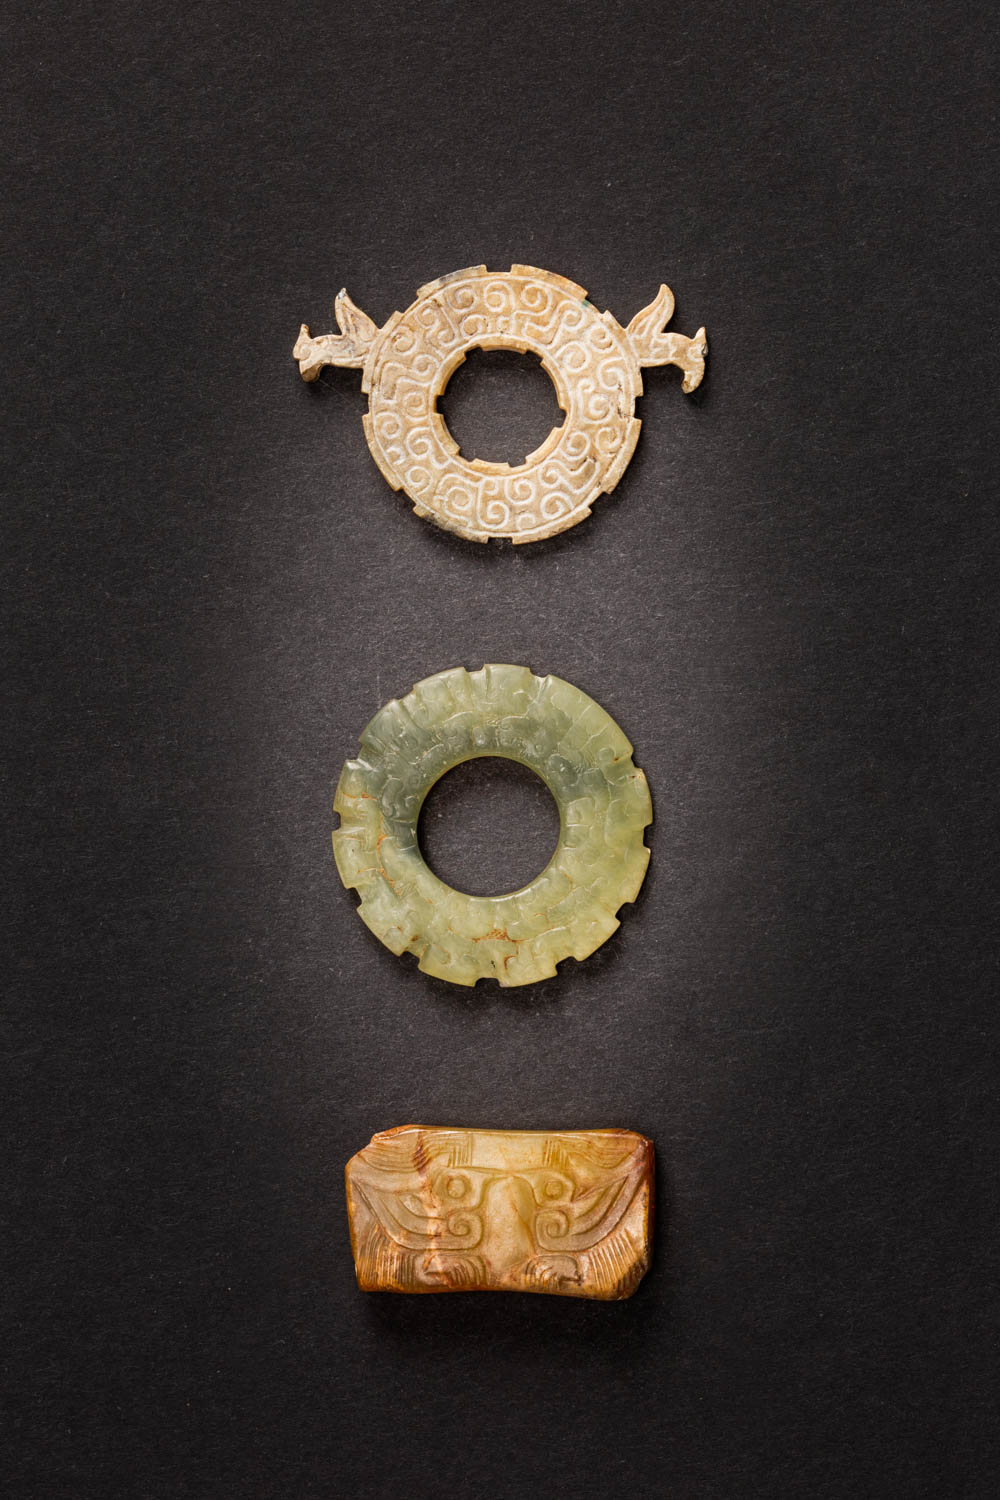 THREE CHINESE ARCHAIC JADE ORNAMENTS WESTERN ZHOU AND EASTERN ZHOU DYNASTY Comprising: a flat opaque